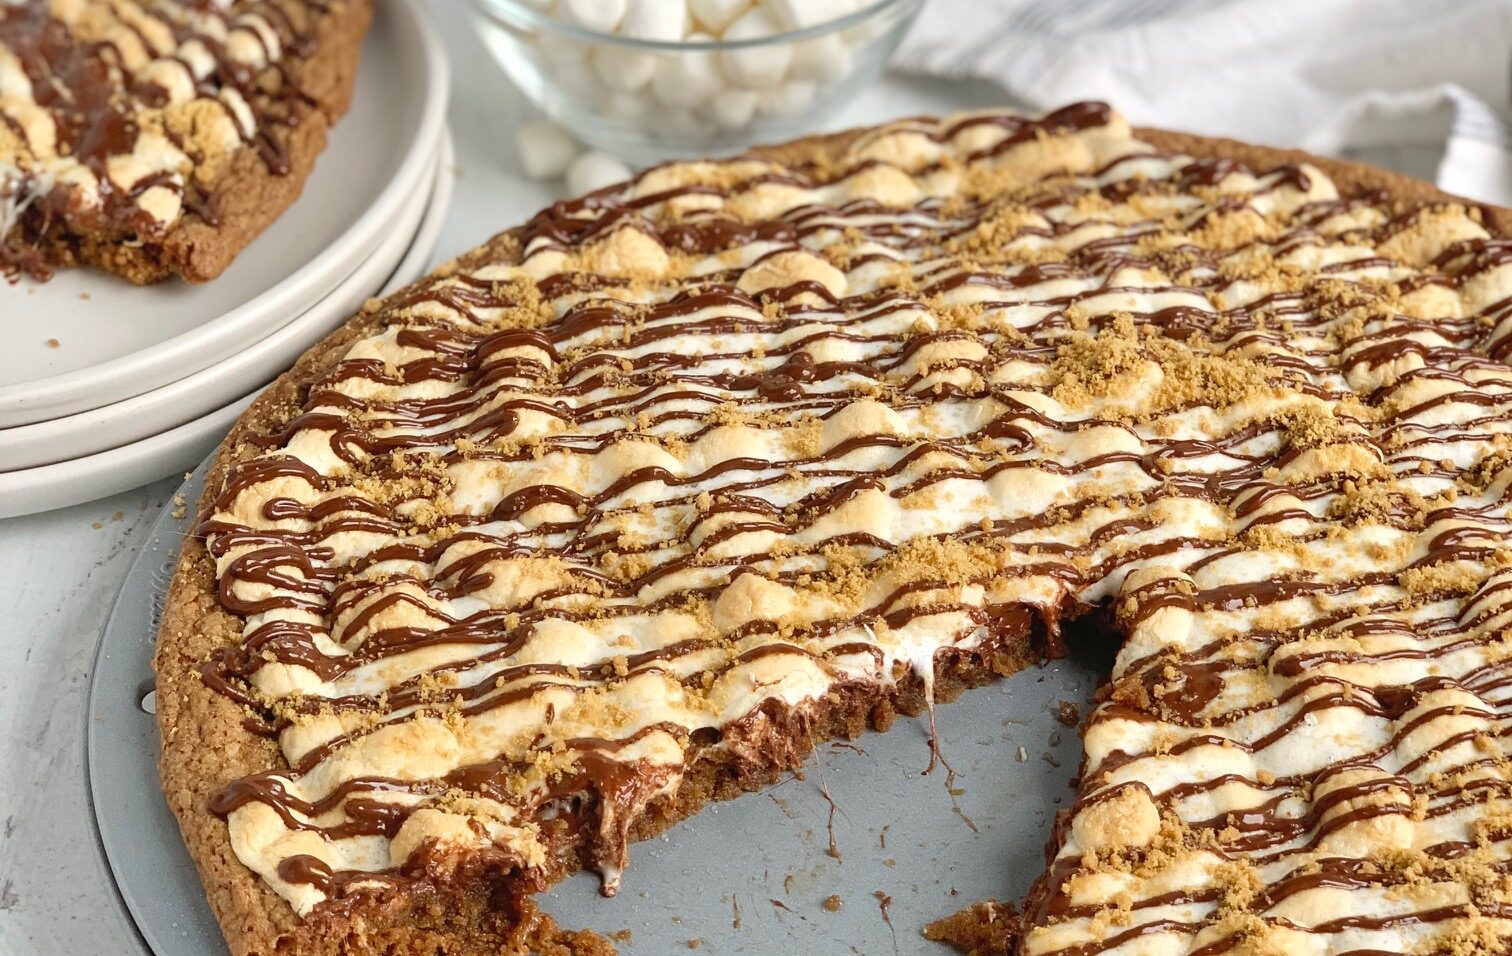 A pizza pan filled with a chewy graham cracker crust, melted chocolate chips, ooey gooey golden brown mini marshmallows, melted chocolate drizzled across the top, and last topped with a handful of crushed graham crackers. This is next to a set of dessert plates and a bowl full of mini marshmallows.